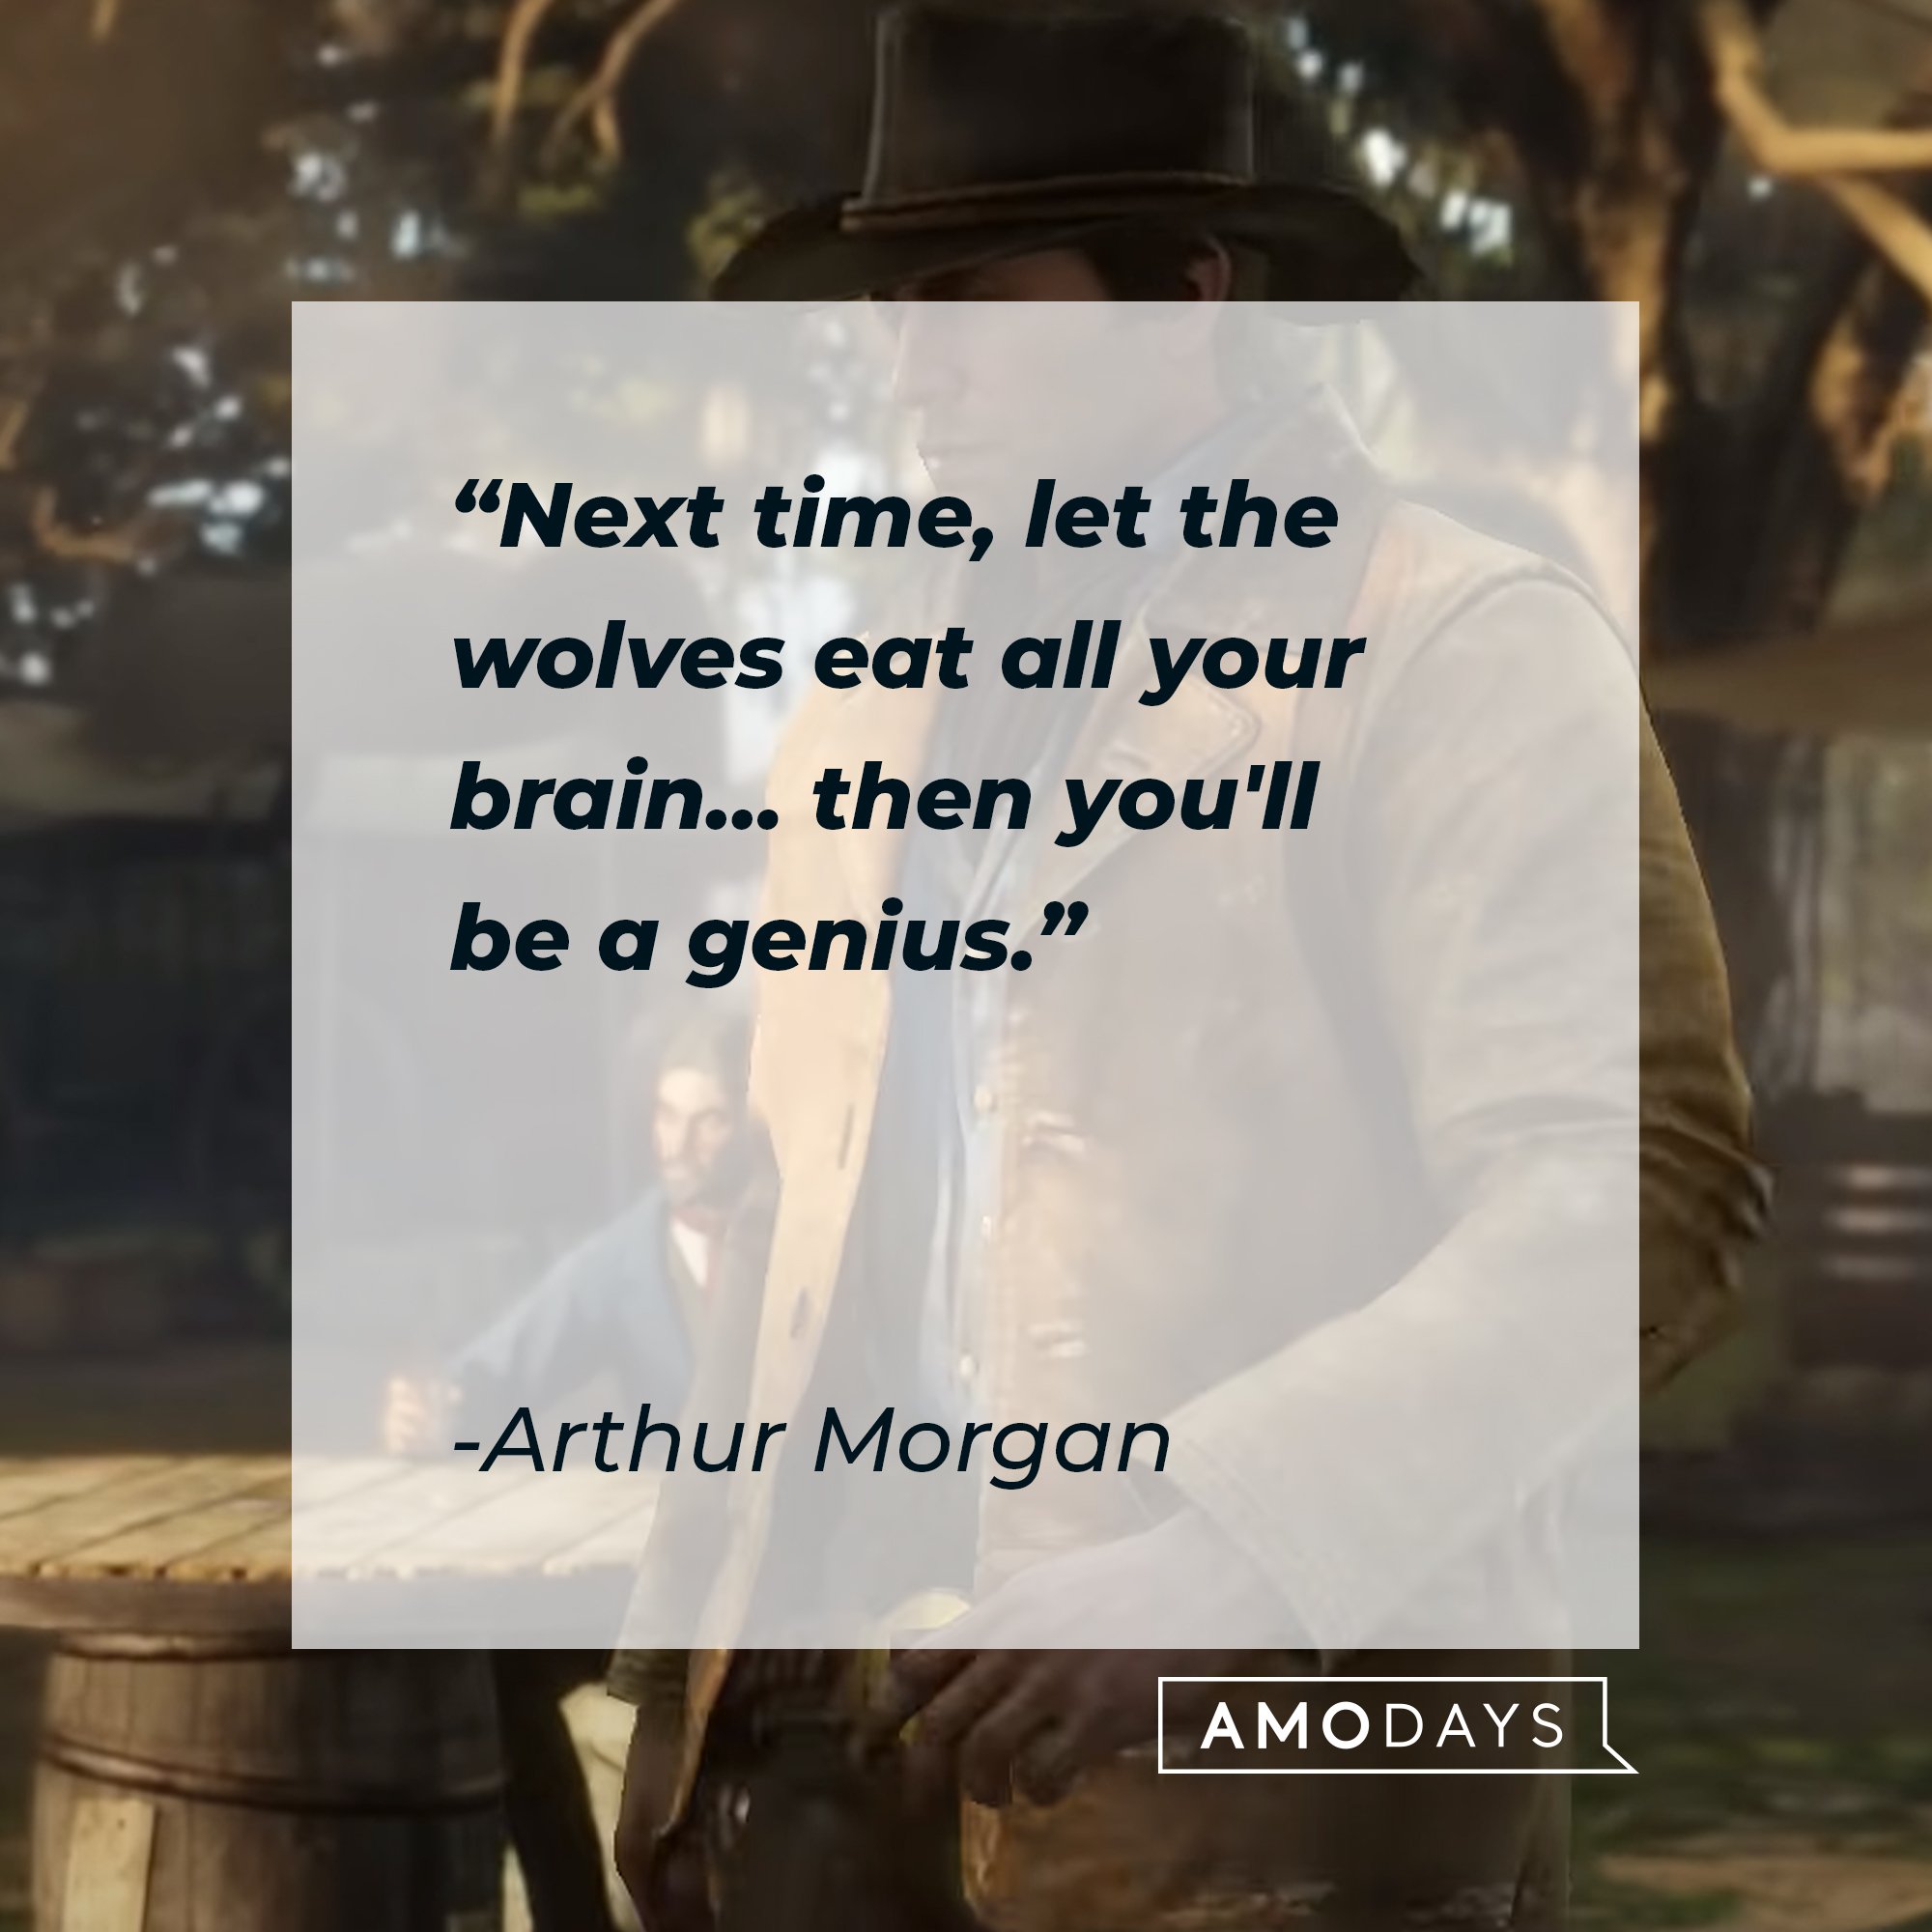 Arthur Morgan's quote: "Next time, let the wolves eat all your brain… then you'll be a genius." | Image: AmoDays